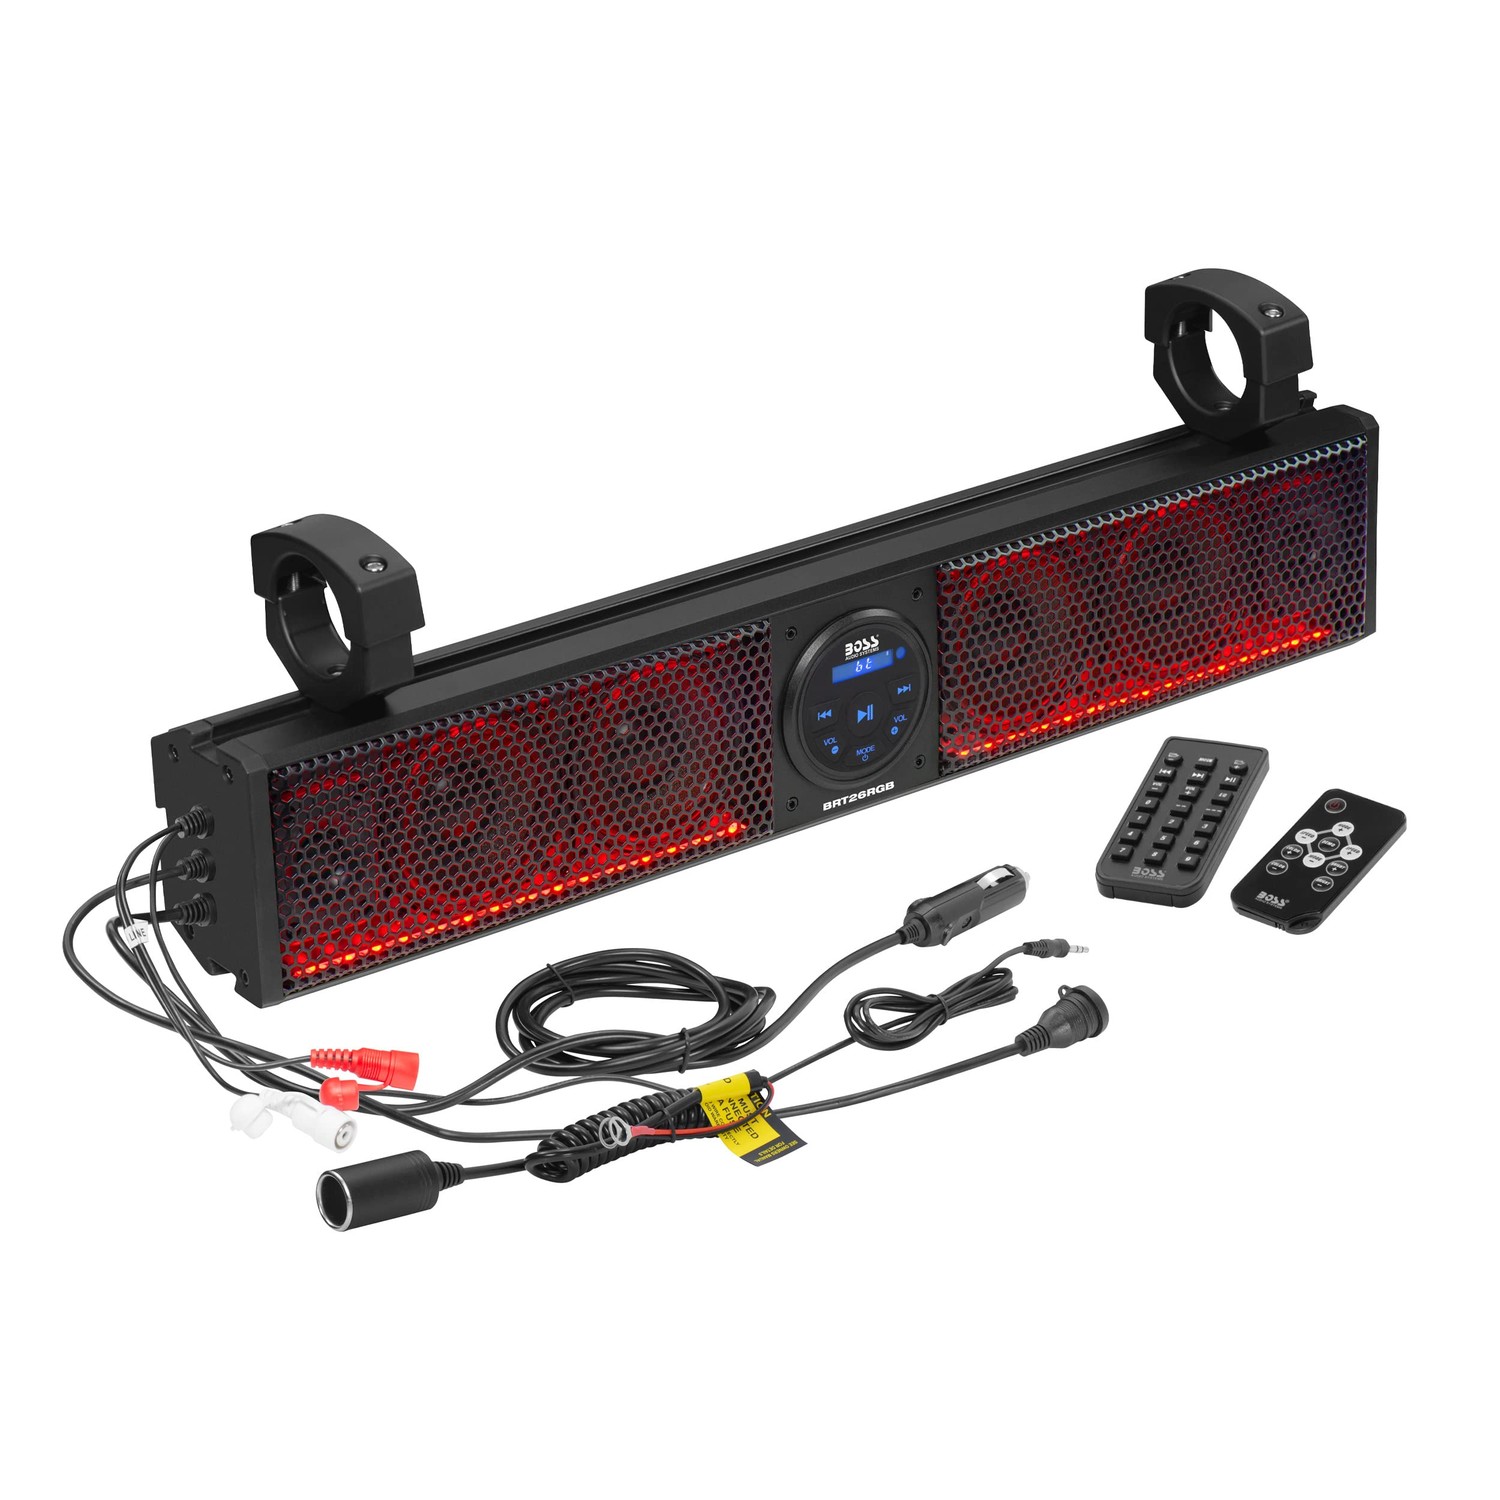 Boss Audio Systems BRT26RGB Atv Utv Sound Bar System - 26 Inches Wide, Ipx5 Rated